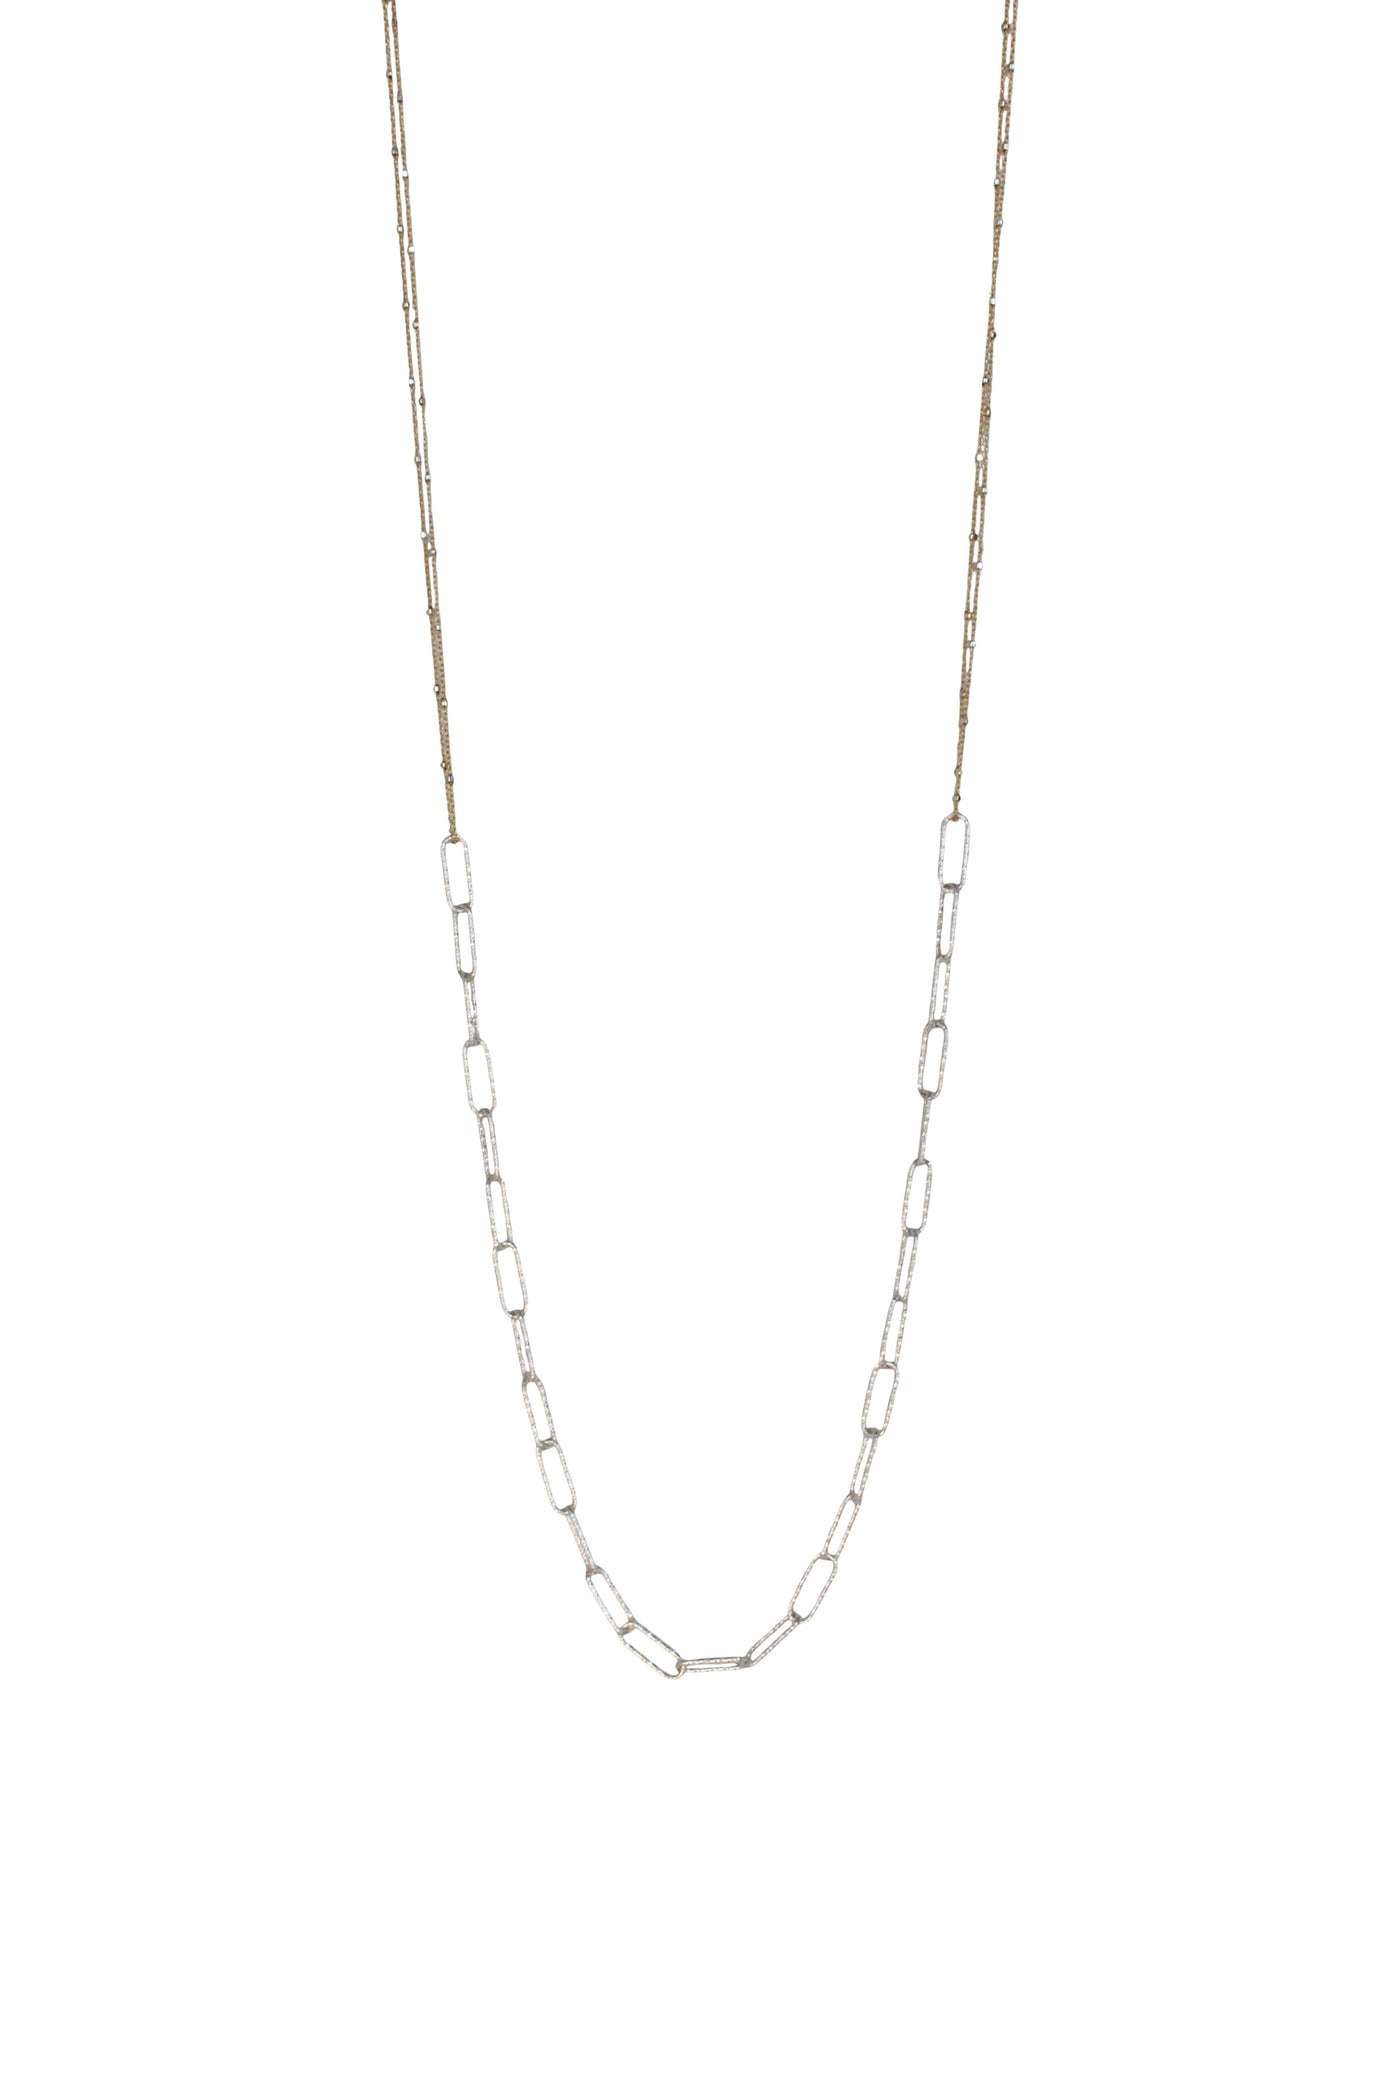 Harmony Chain Necklace in Silver Sparkle Box Chain